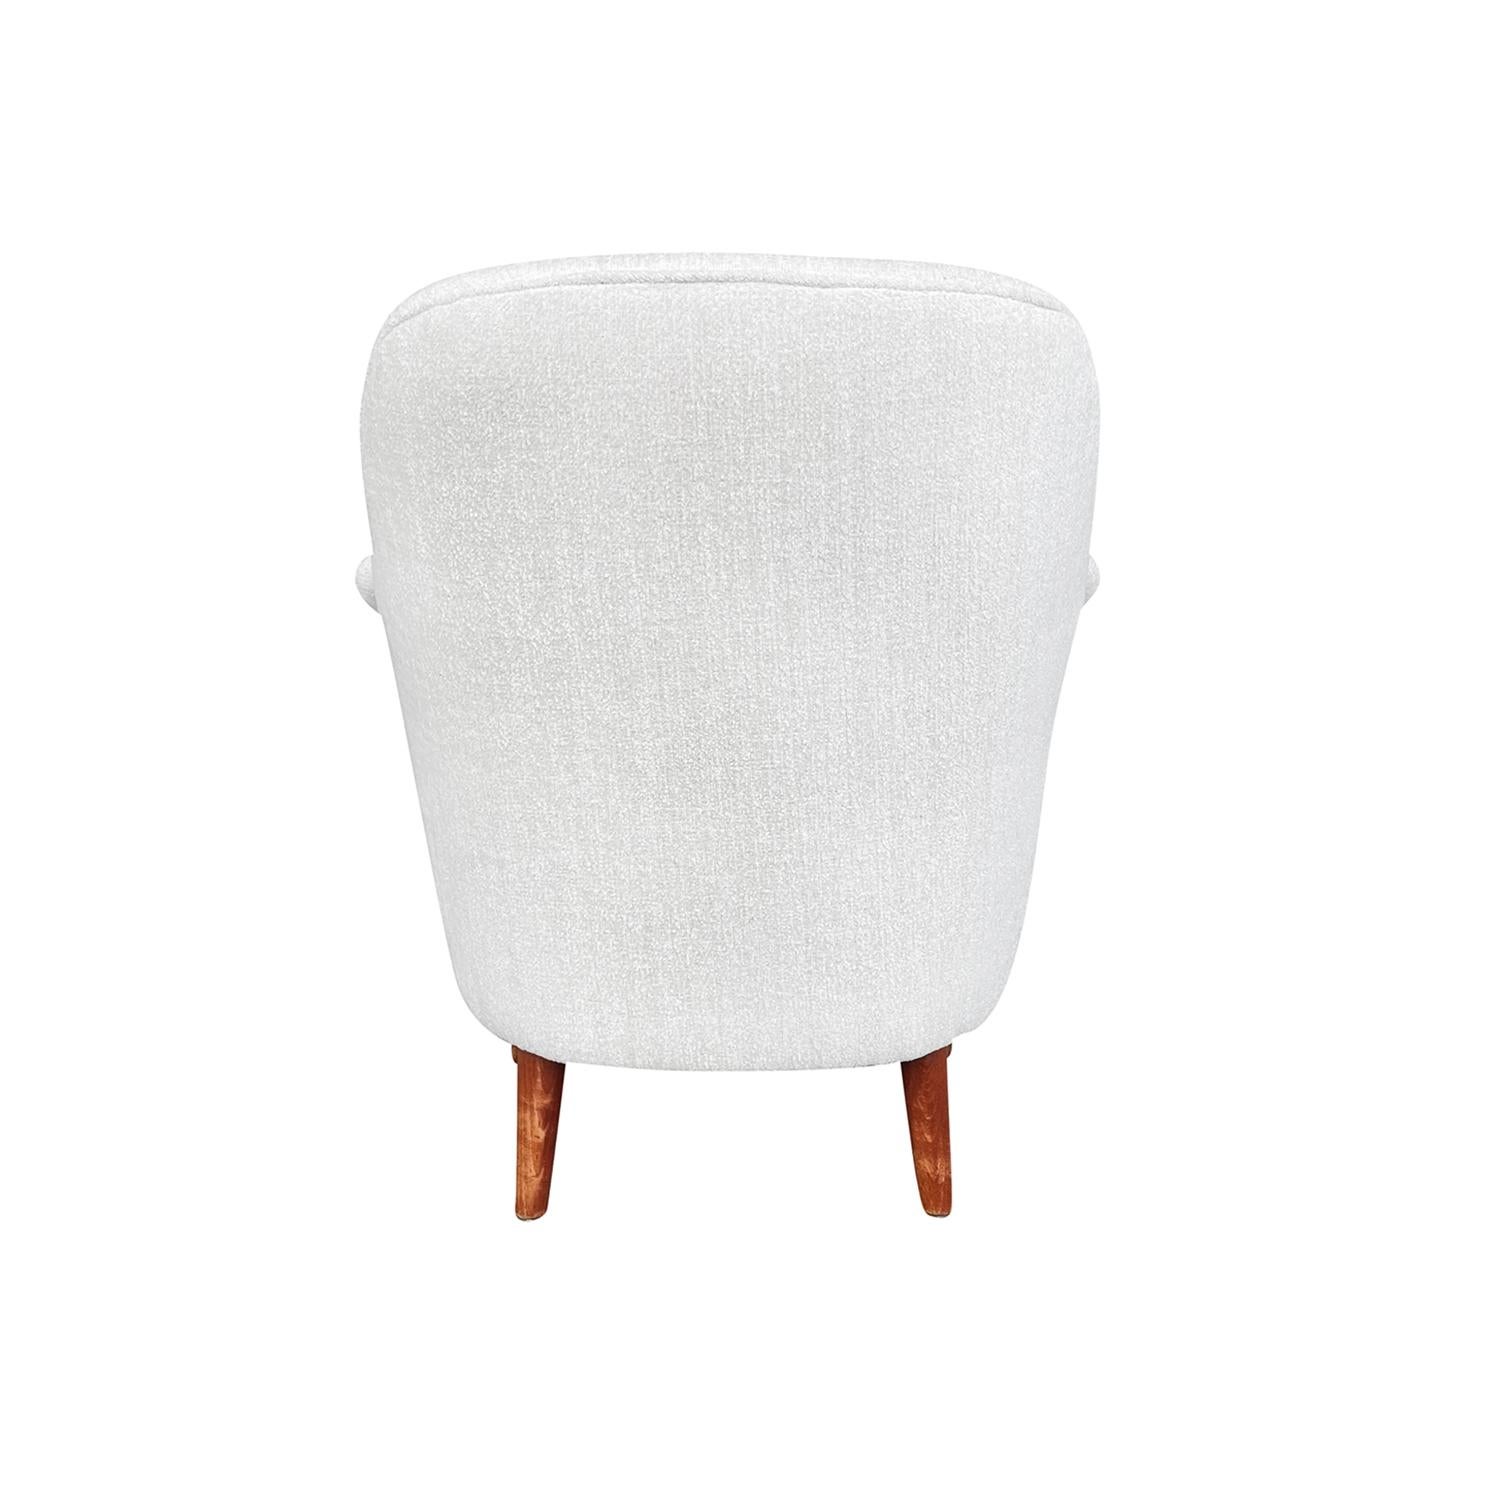 20th Century White Swedish Samspel Easy Chair, Birch Armchair by Carl Malmsten In Good Condition For Sale In West Palm Beach, FL